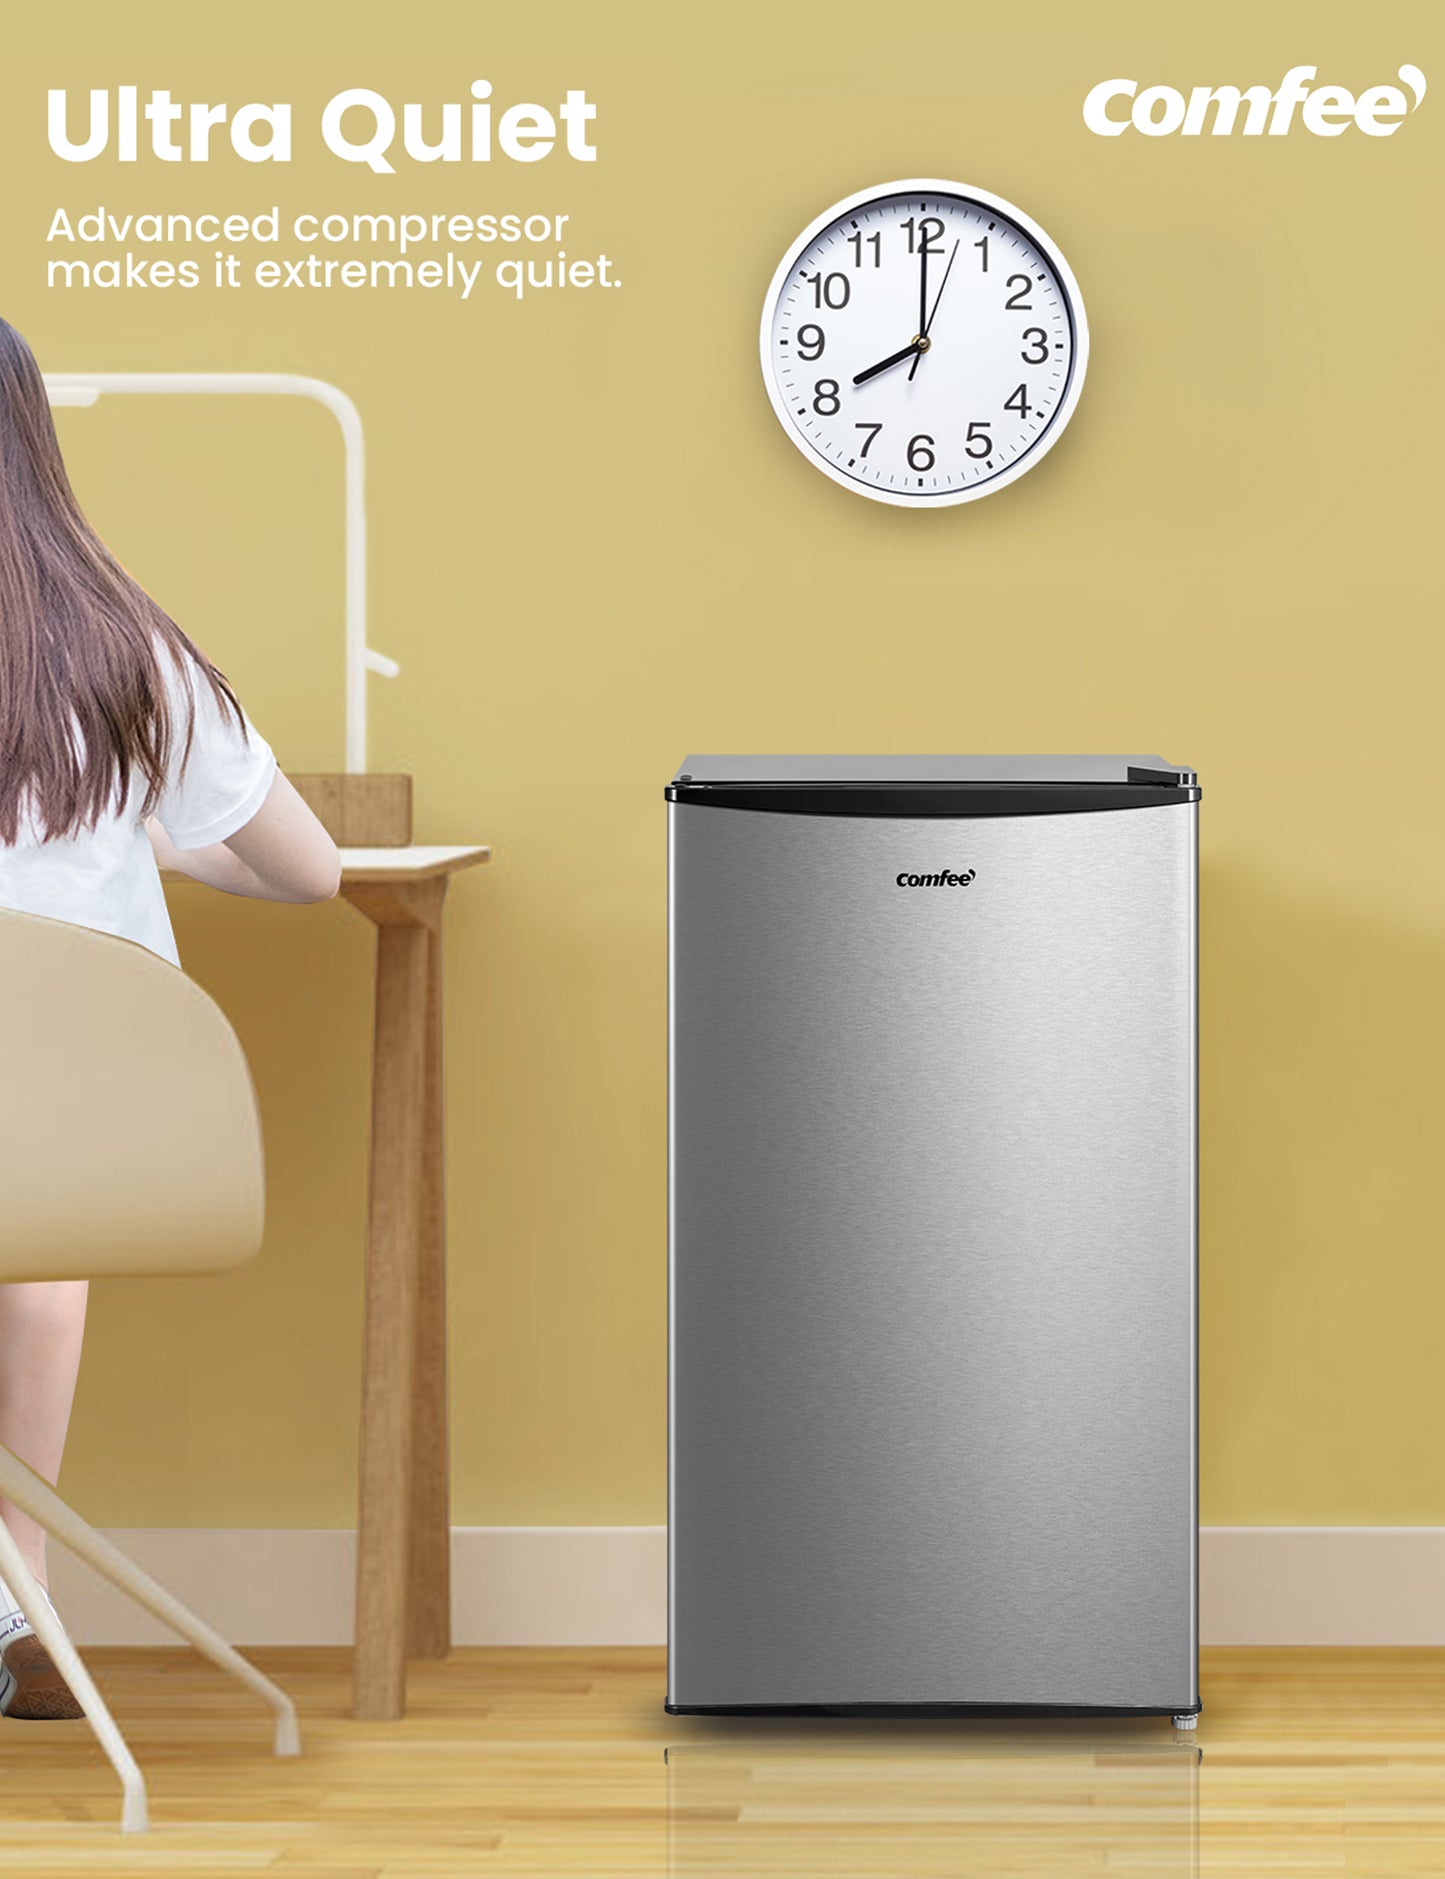 comfee compact refrigerator next to woman sitting at a desk